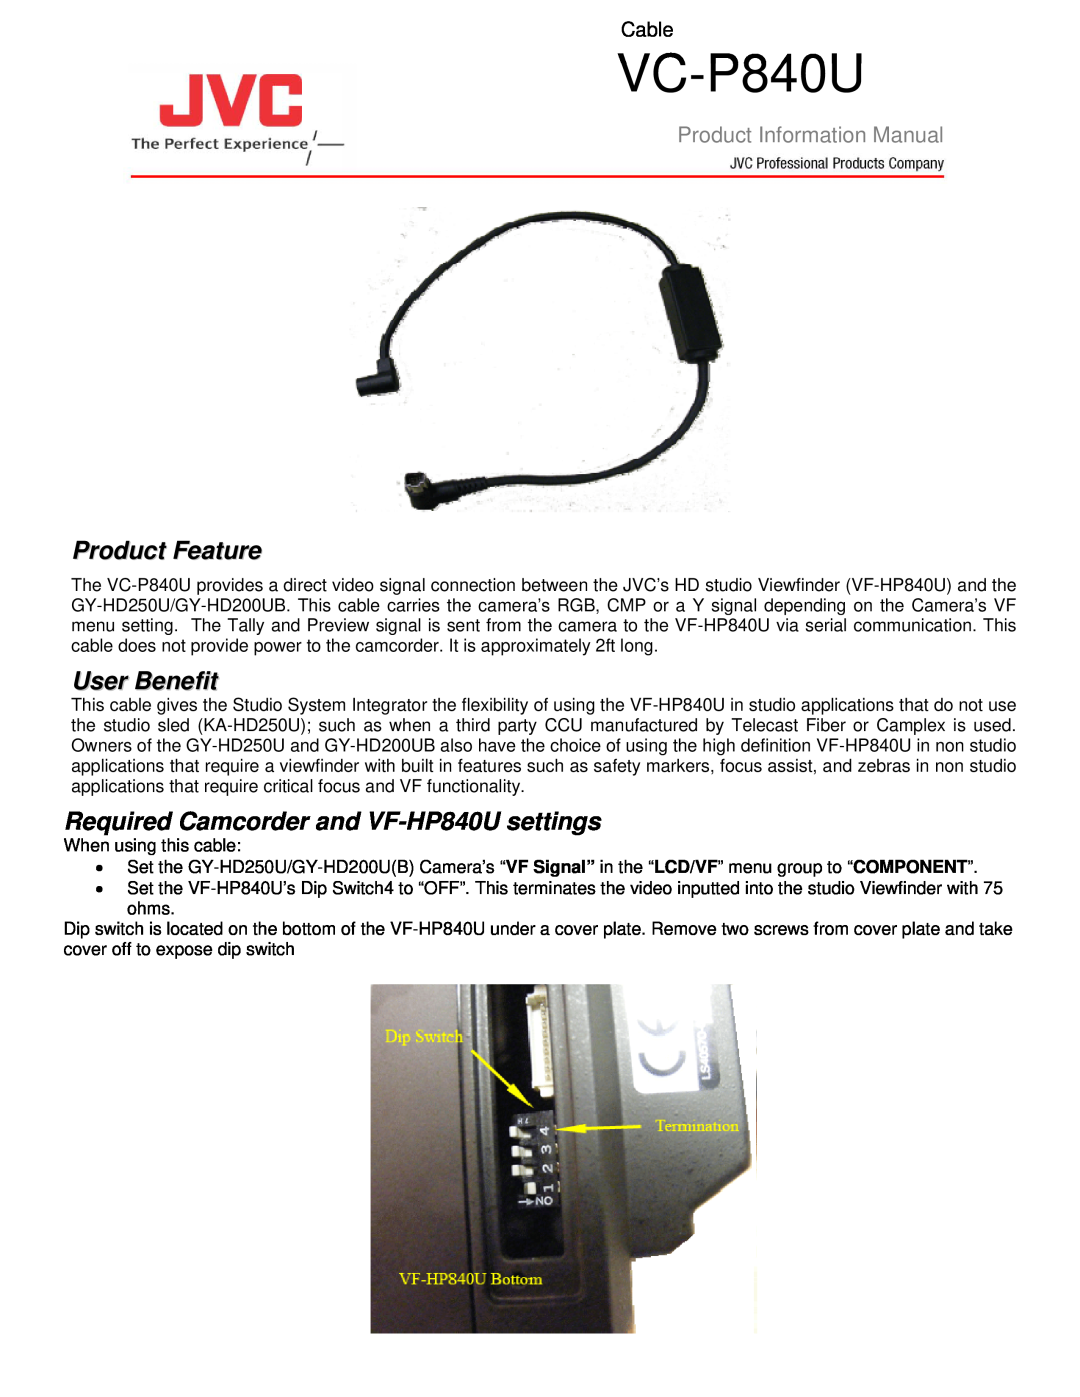 JVC VC-P840U manual Product Feature, User Benefit, Required Camcorder and VF-HP840Usettings, Product Information Manual 